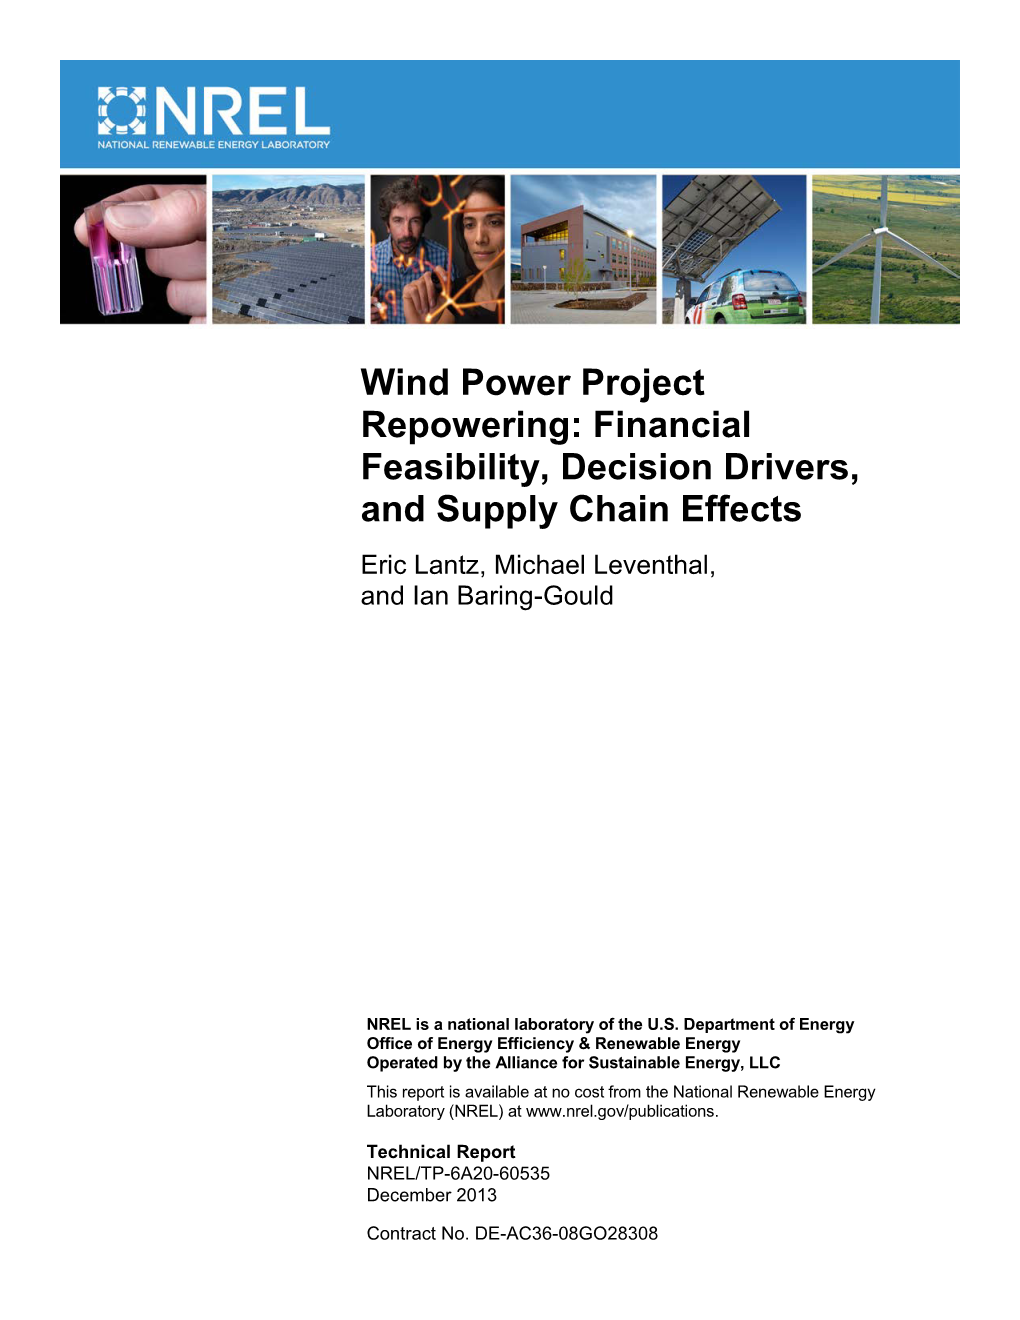 Wind Power Project Repowering: Financial Feasibility, Decision Drivers, and Supply Chain Effects Eric Lantz, Michael Leventhal, and Ian Baring-Gould